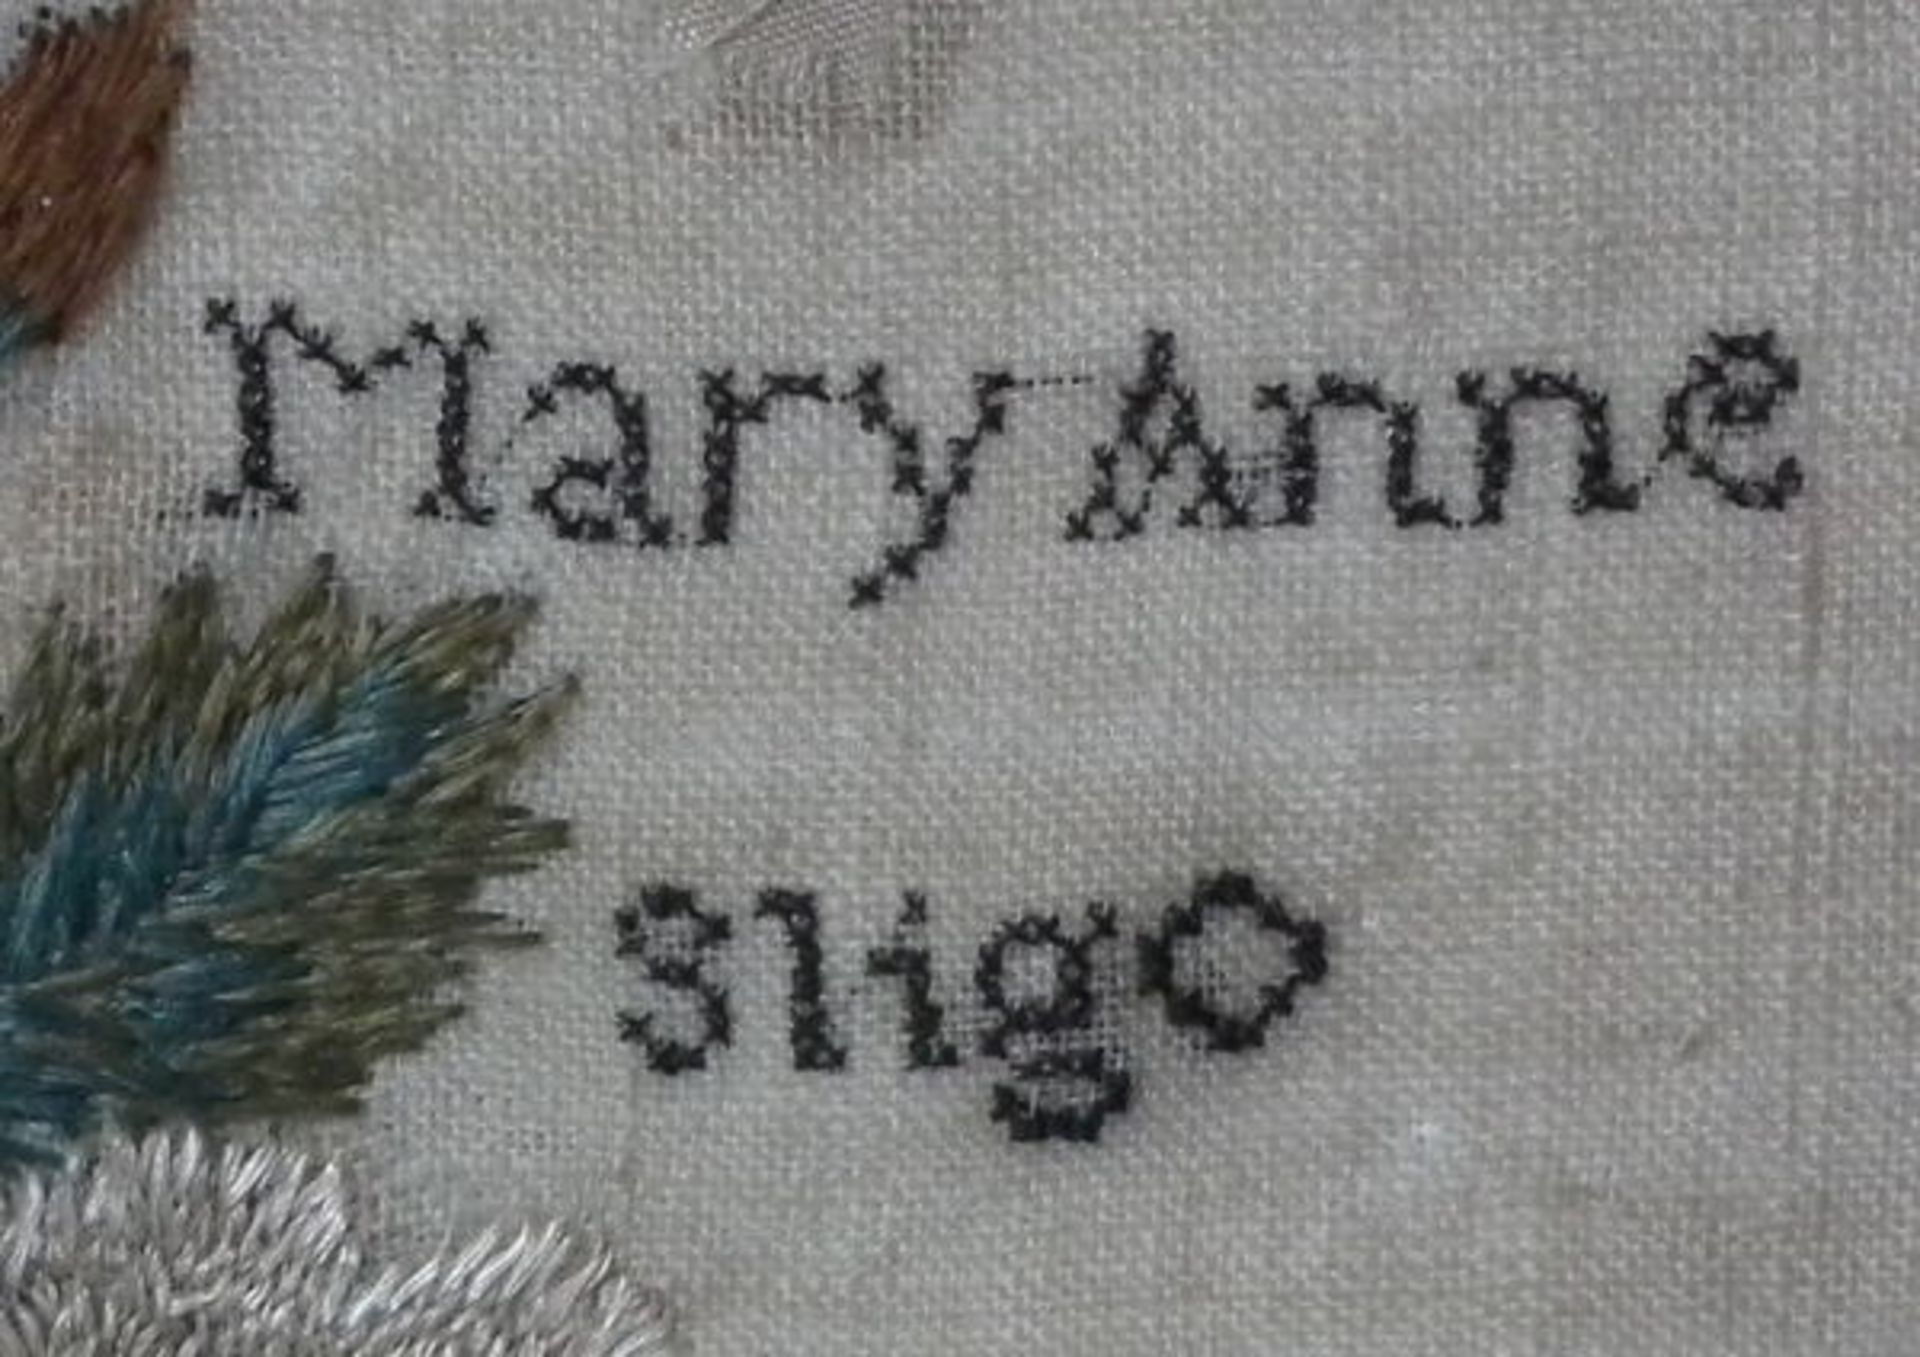 Irish Needlework Sampler dated 1832 by Mary Anne Enright FREE UK DELIVERY - Image 11 of 38